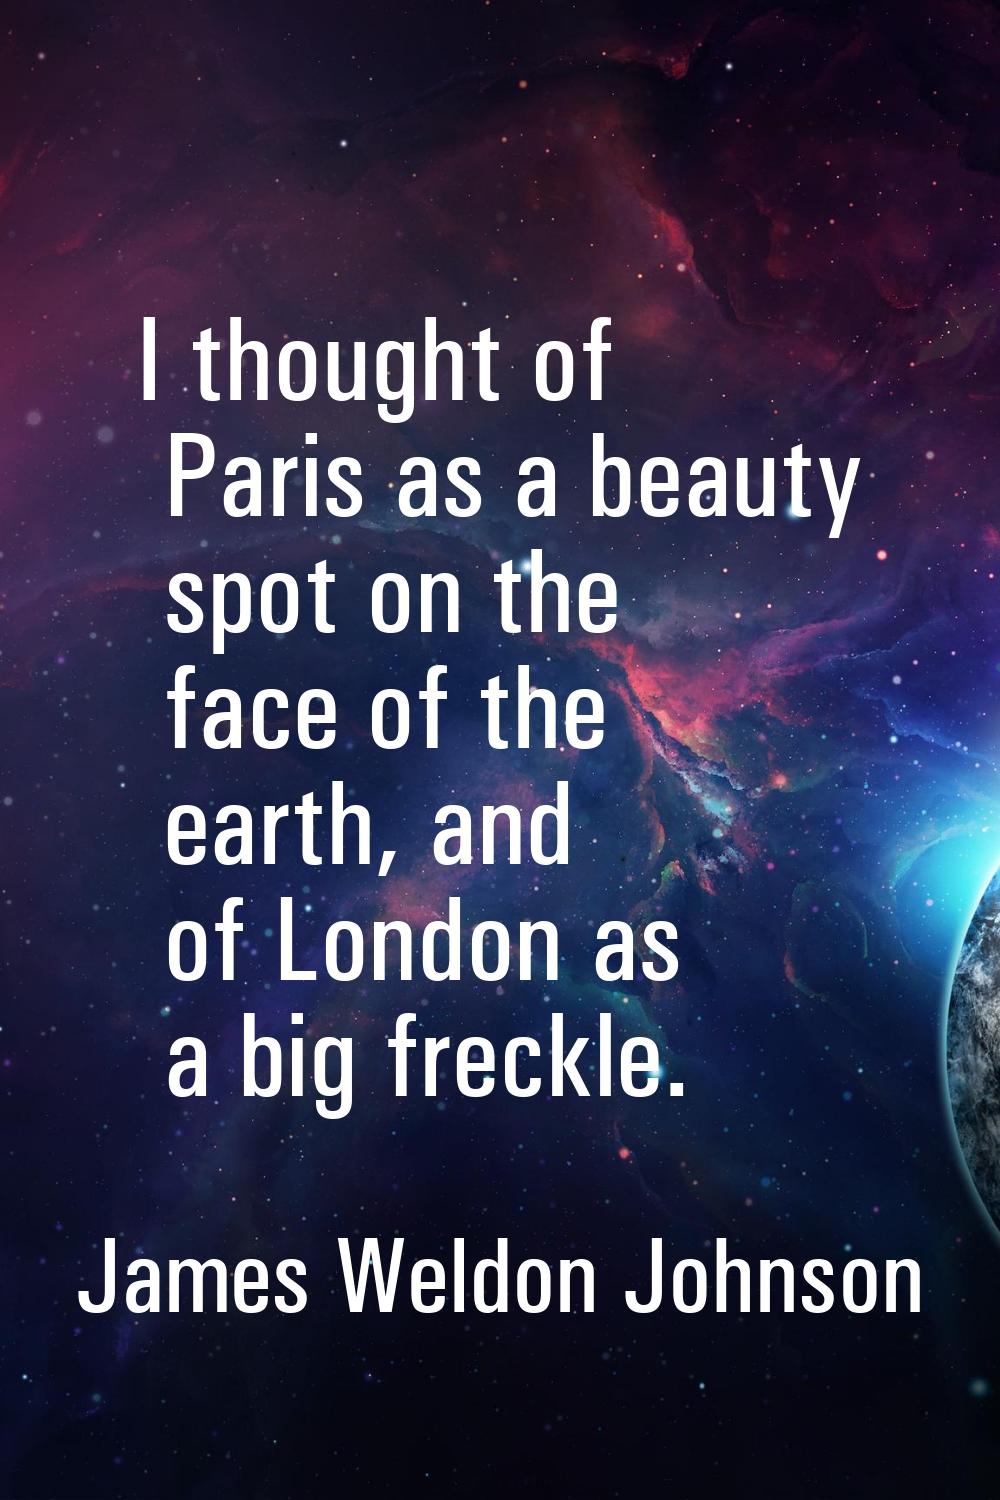 I thought of Paris as a beauty spot on the face of the earth, and of London as a big freckle.